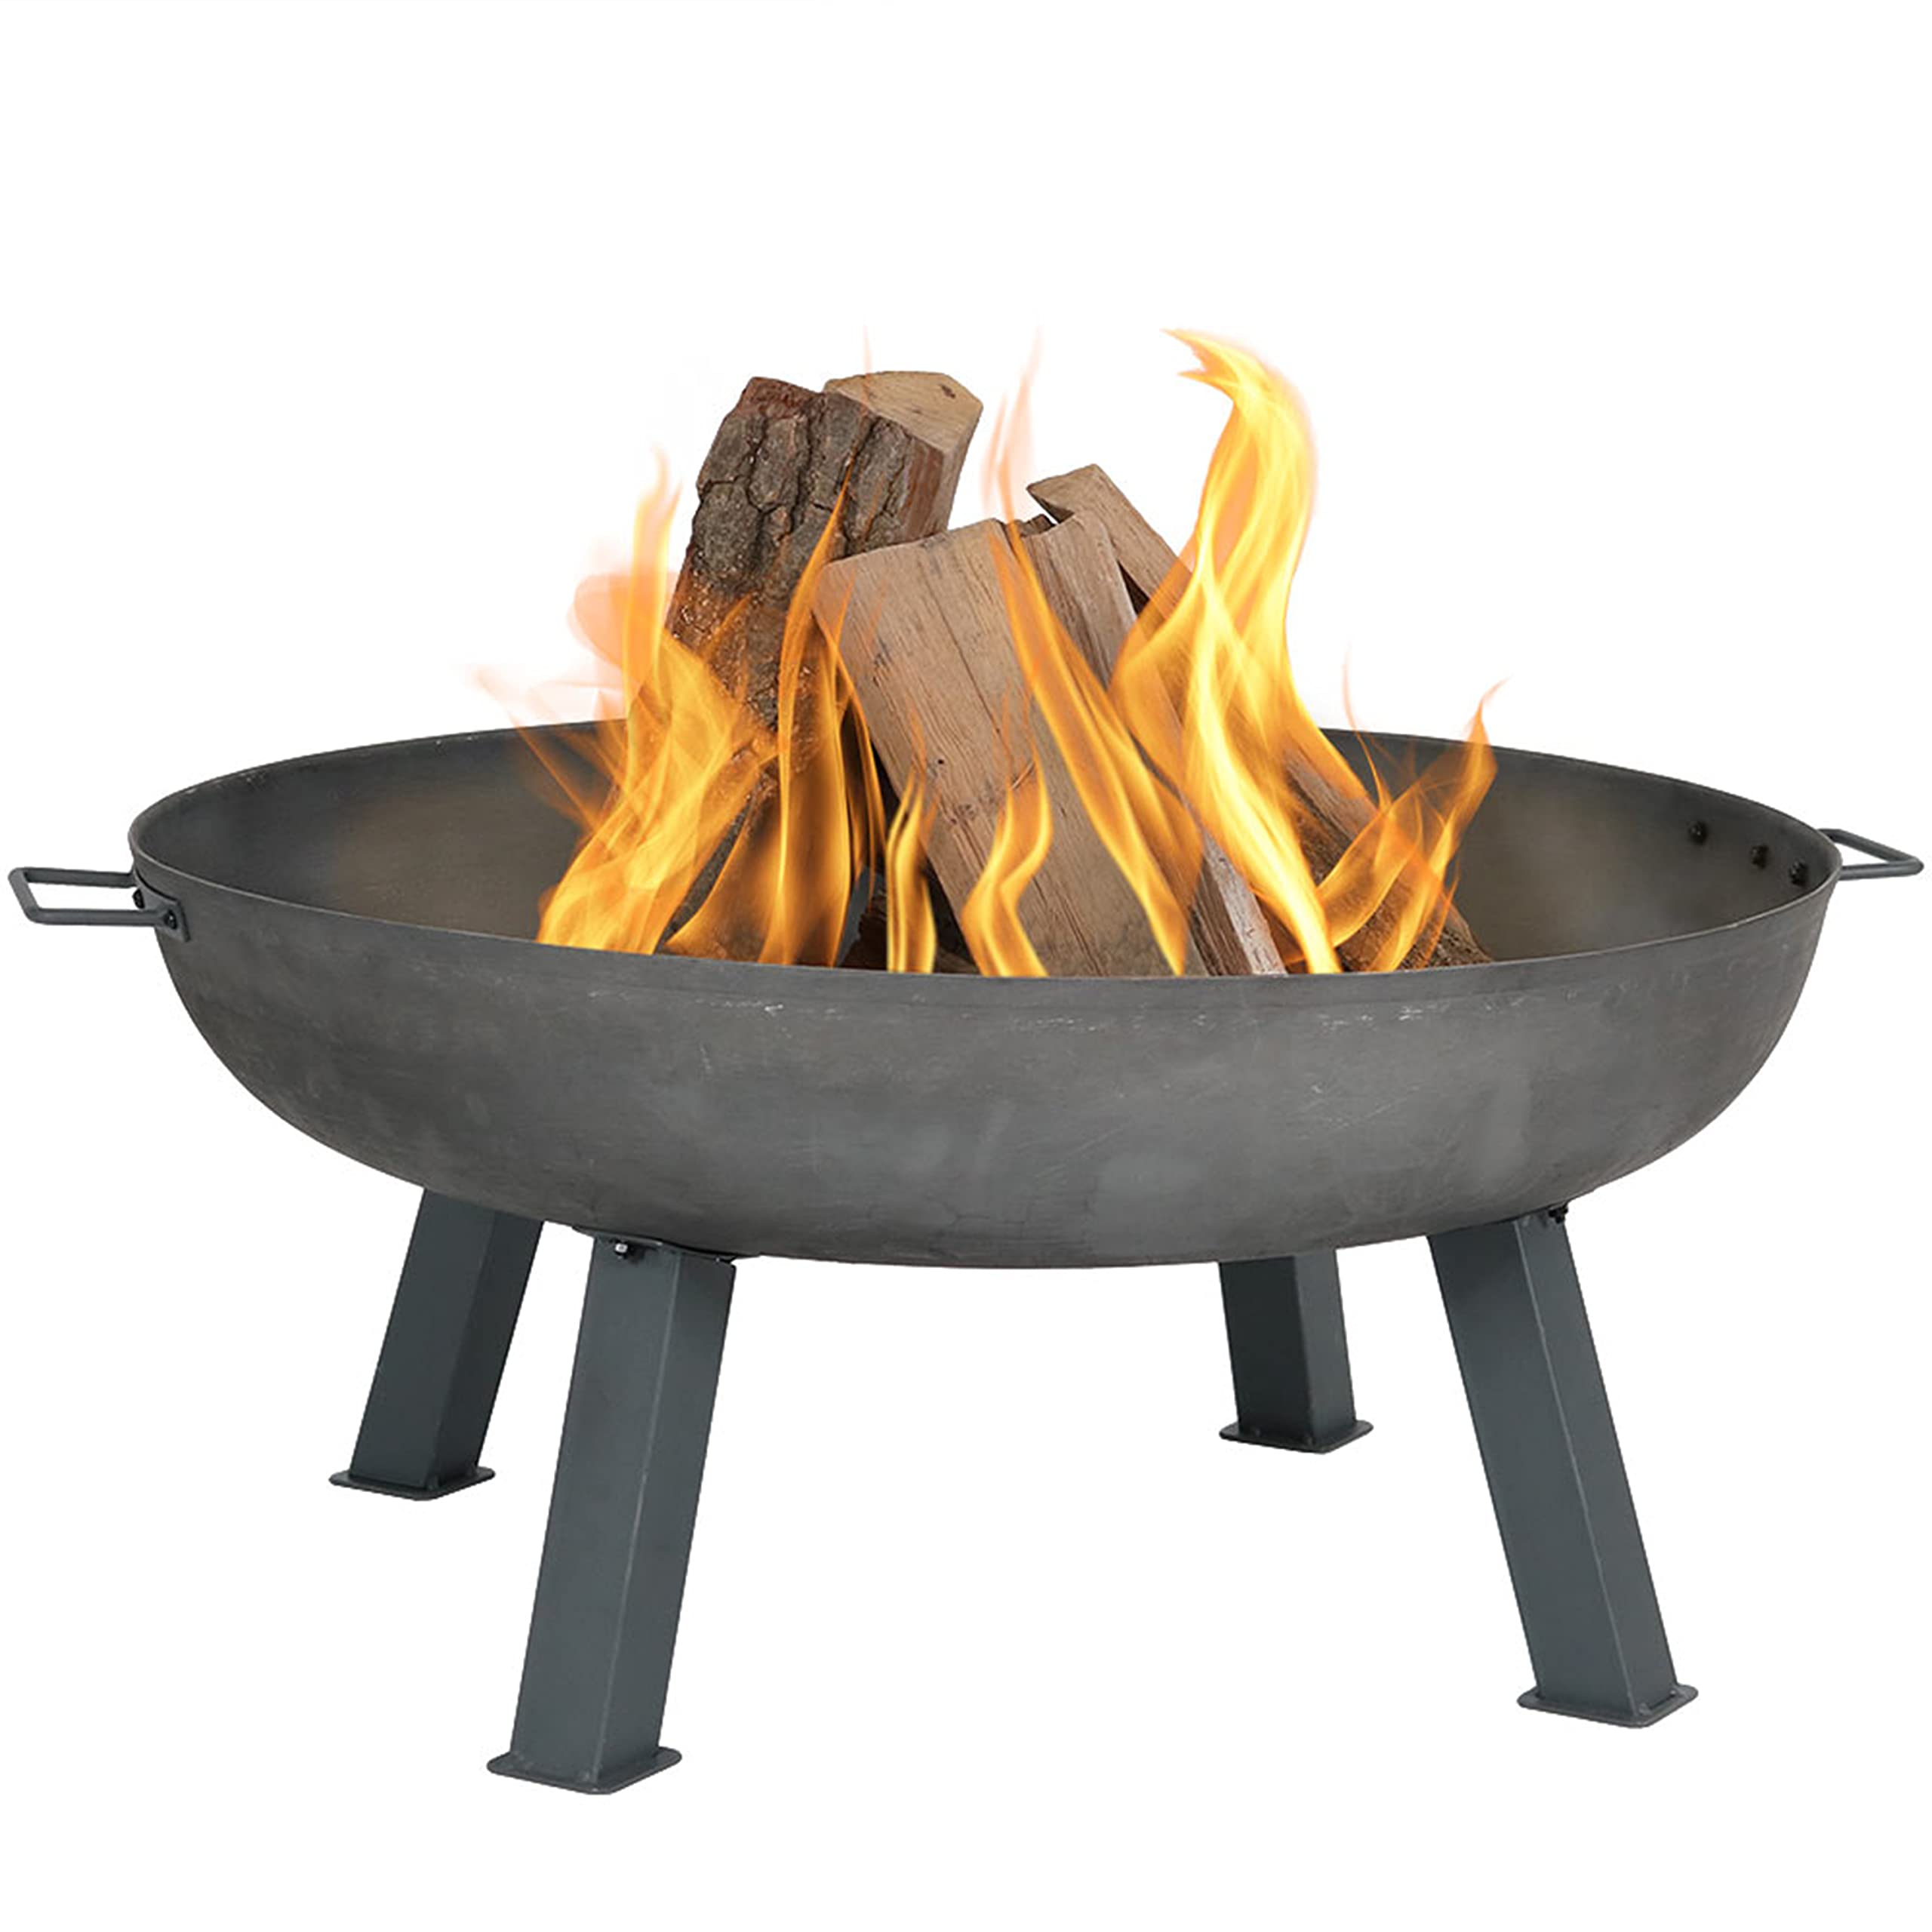 Rustic Steel Colored Cast Iron Fire Bowl With Handles Outdoor Wood Burning Fire Pit Bowl For Backyard Patio or Porch